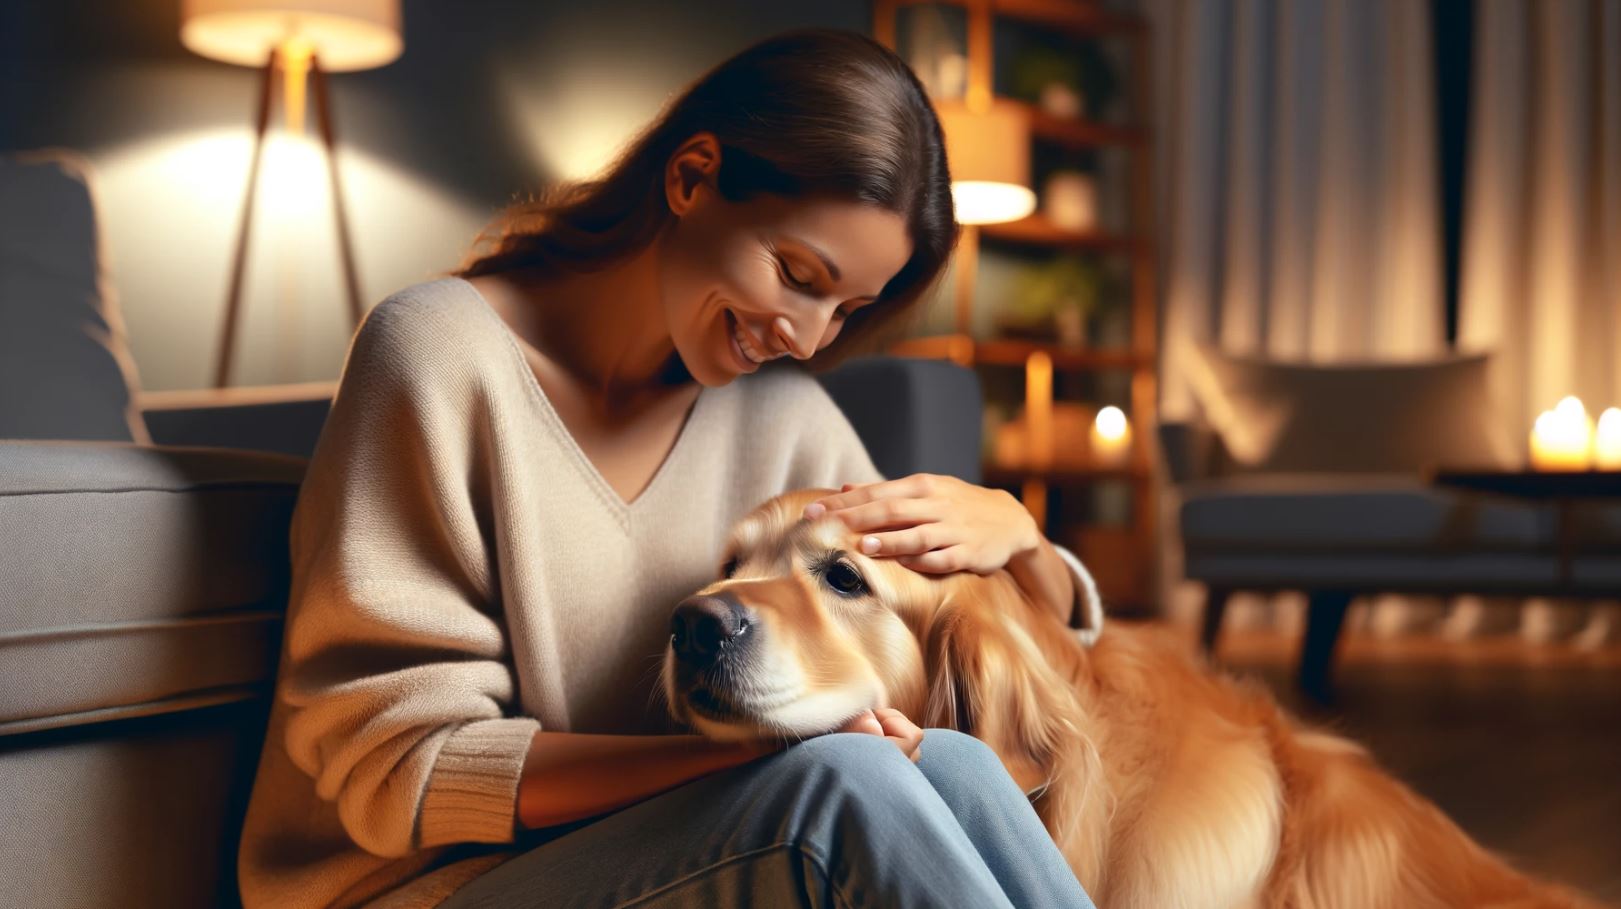 Emotional connection with domestic animals